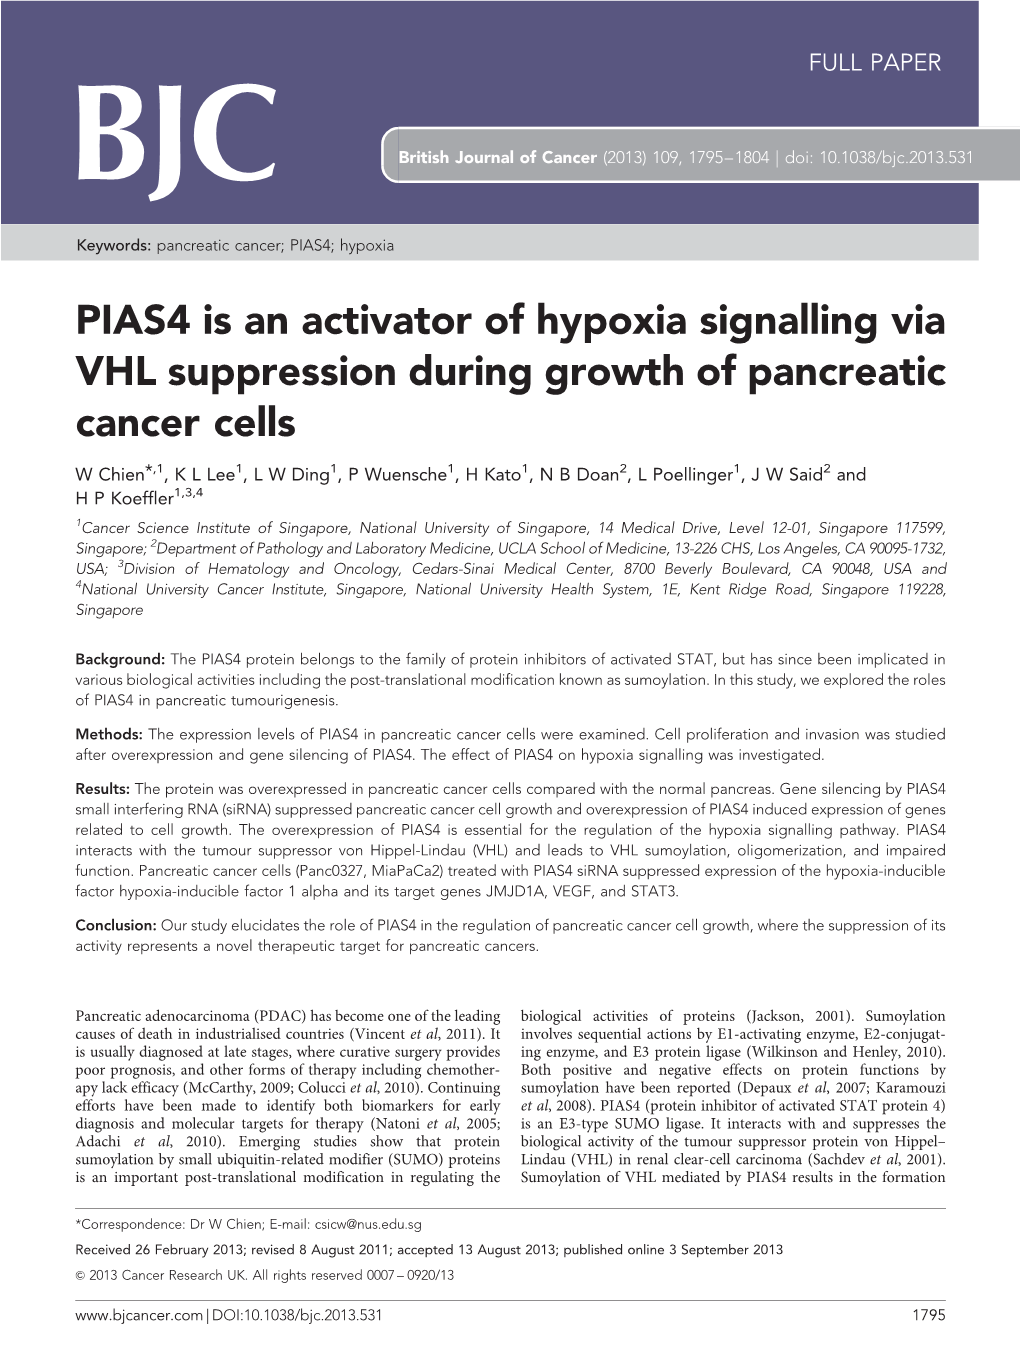 PIAS4 Is an Activator of Hypoxia Signalling Via VHL Suppression During Growth of Pancreatic Cancer Cells